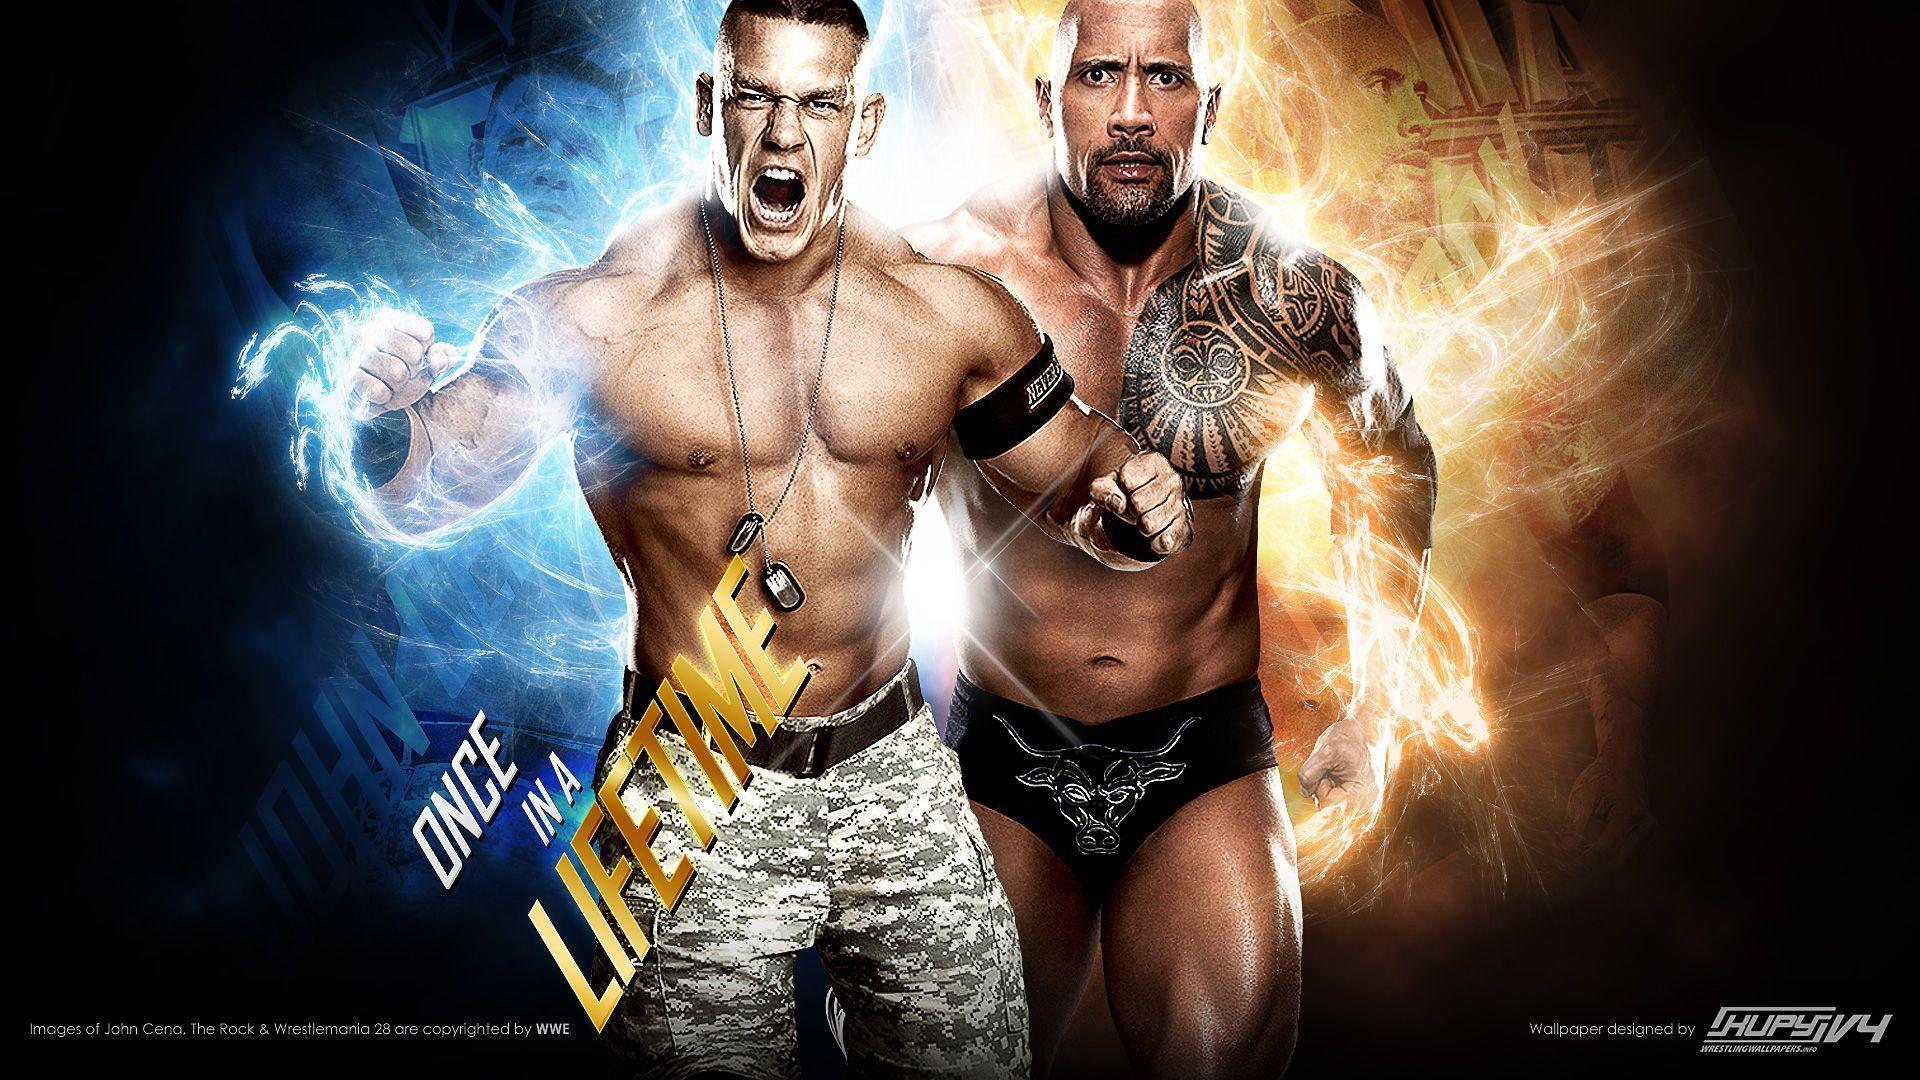 NEW Road to WrestleMania 28: John Cena vs. The Rock Once In A